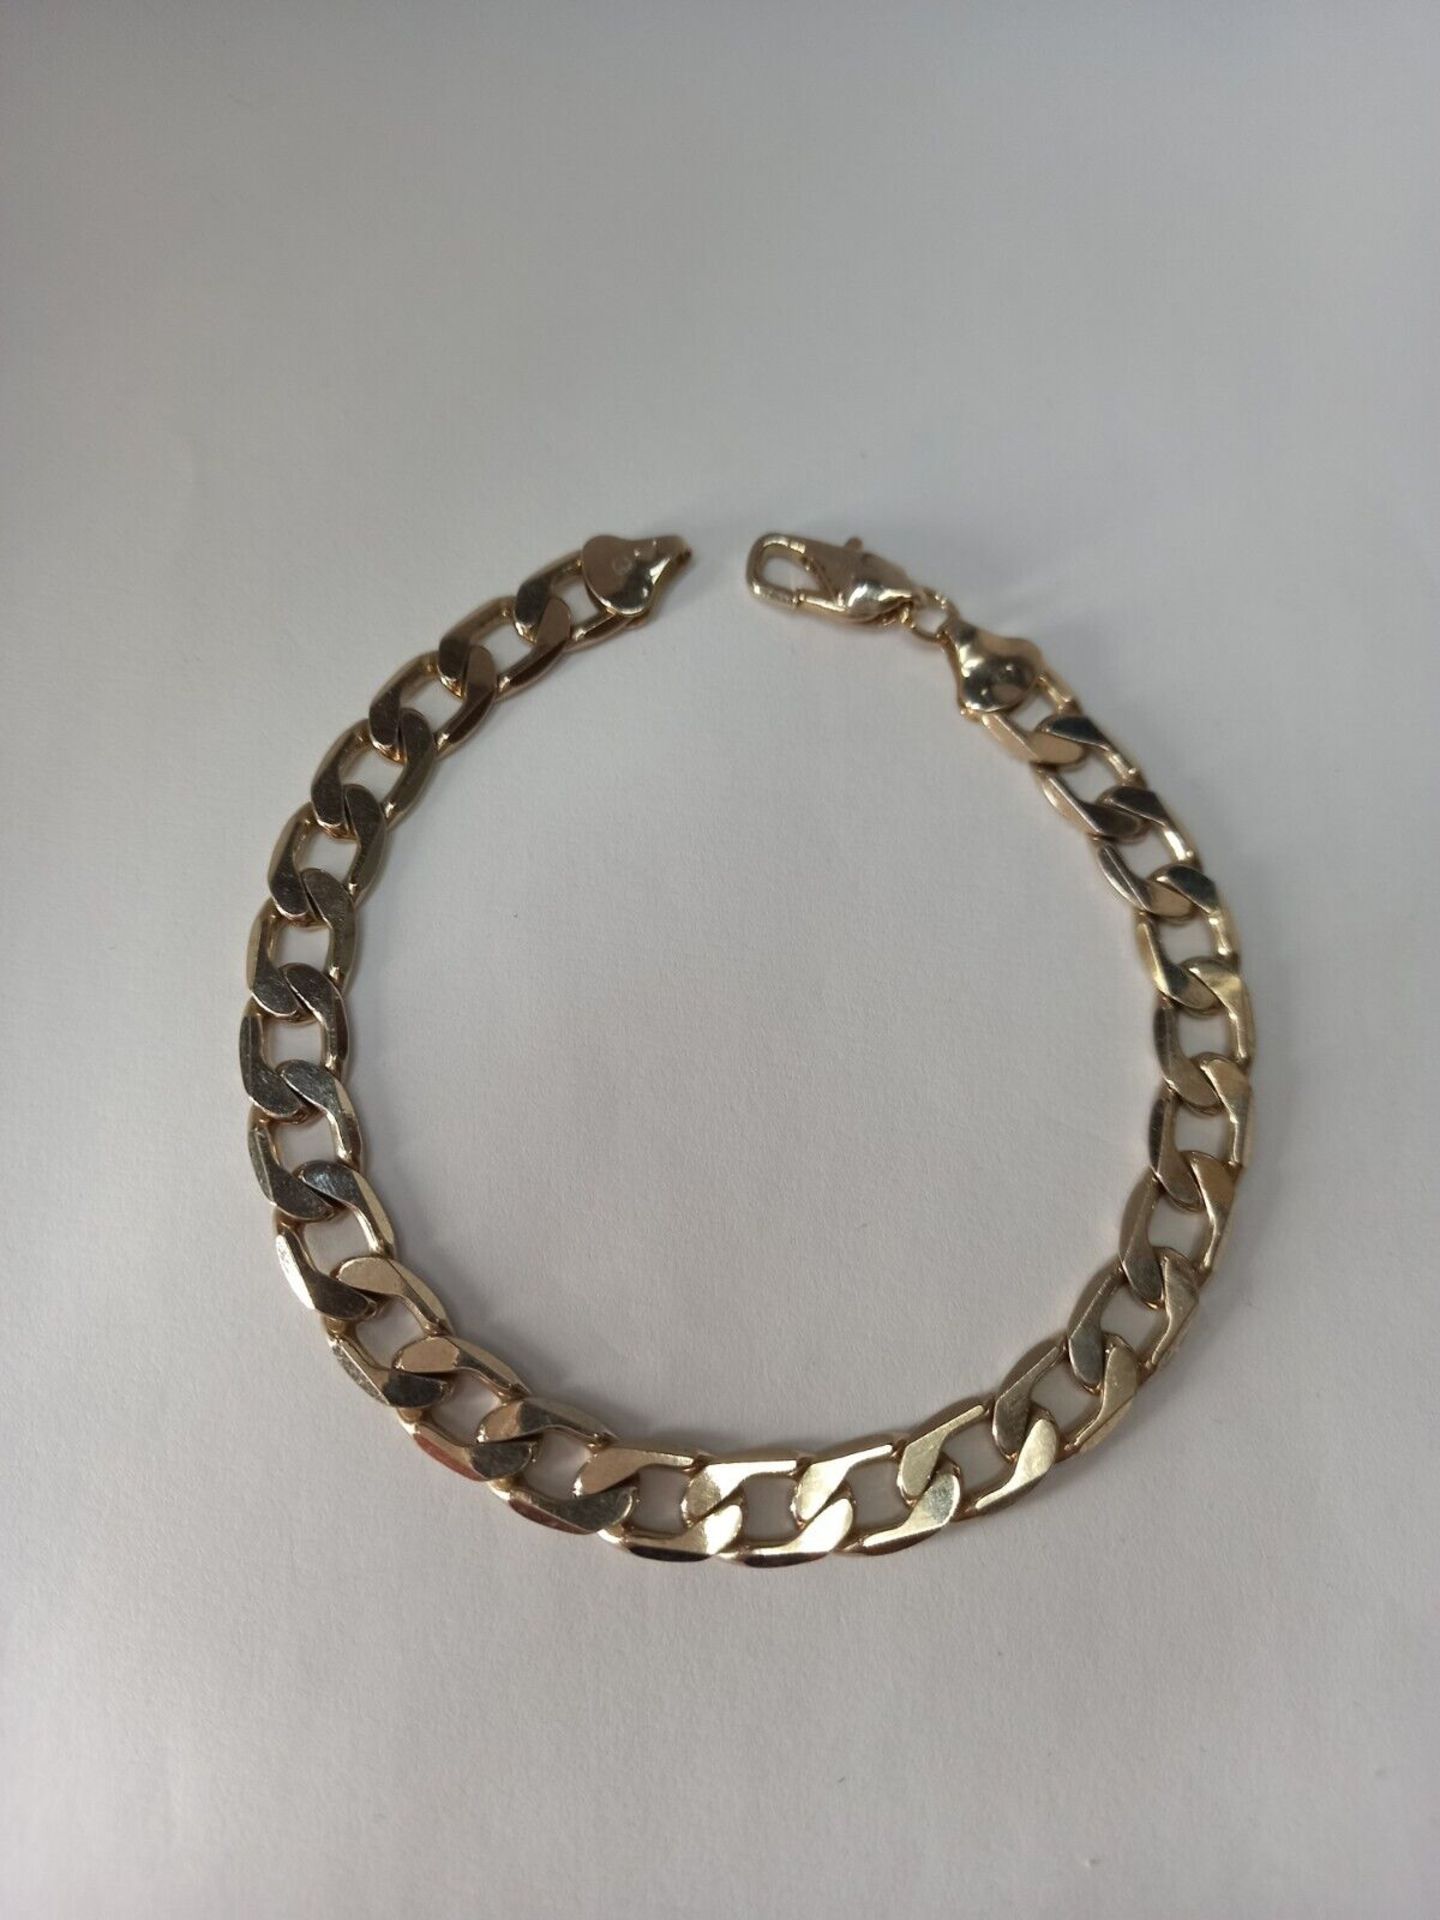 YELLOW GOLD PLATED GENTS BRACELET, 925 STERLING SILVER, 8.5INCH, CURB BRACELET - Image 2 of 3